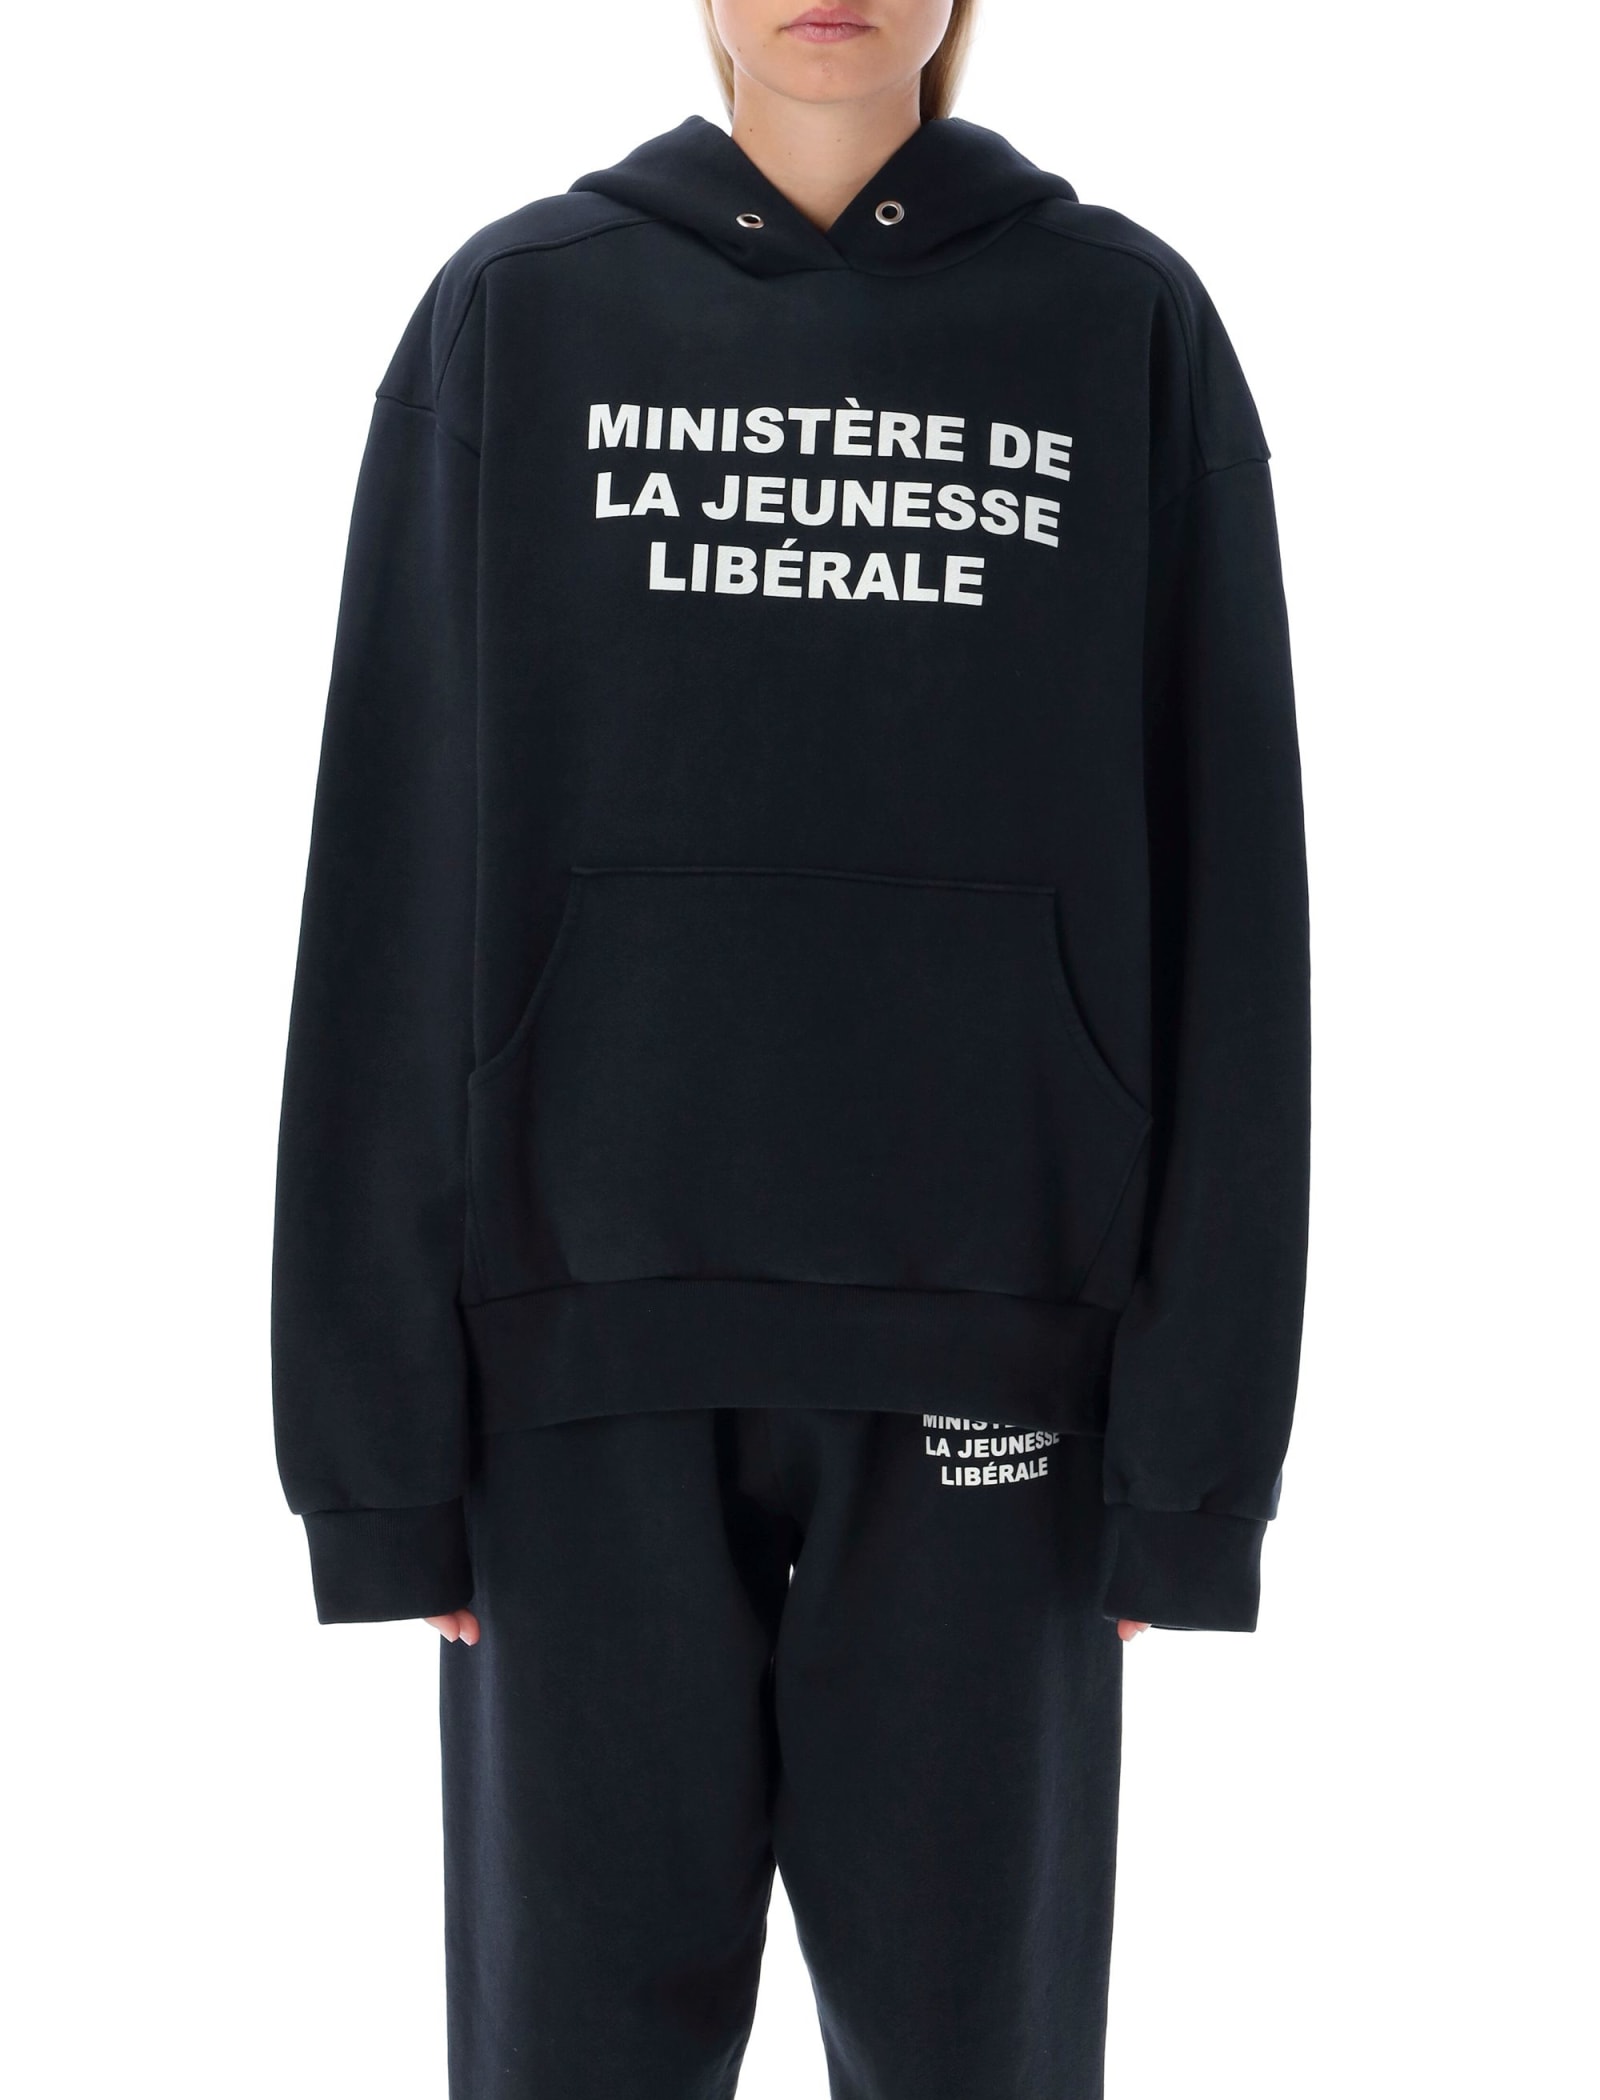 Liberal Youth Ministry Printed Hooded Sweatshirt